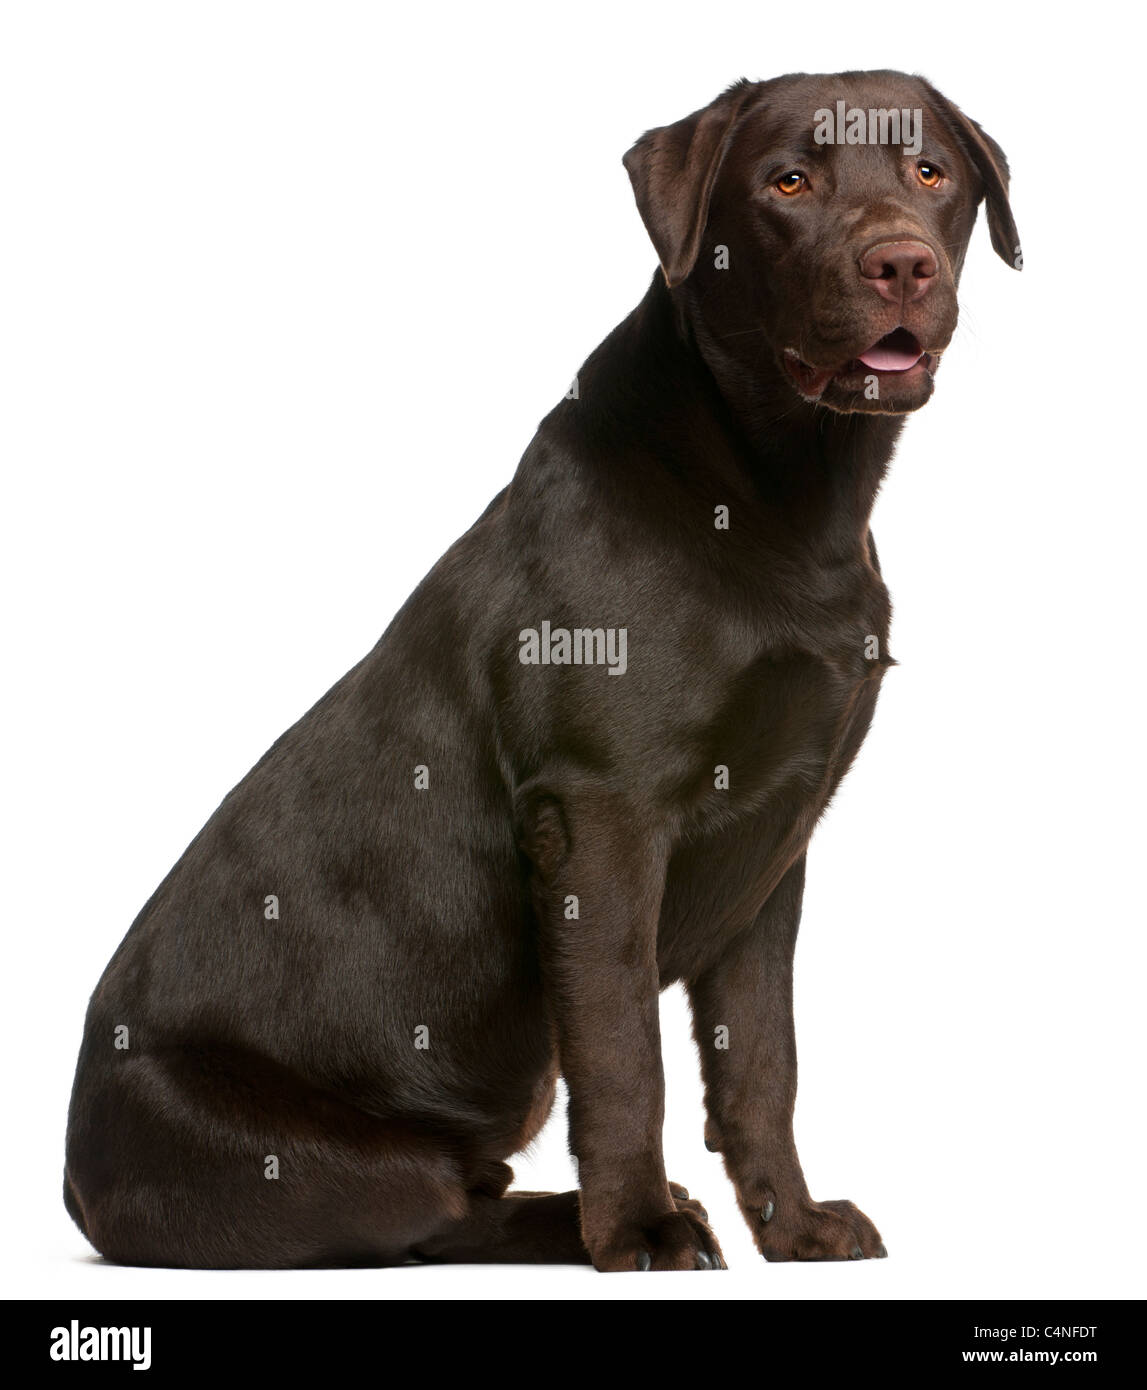 Labrador Retriever, 9 months old, sitting in front of white background Stock Photo